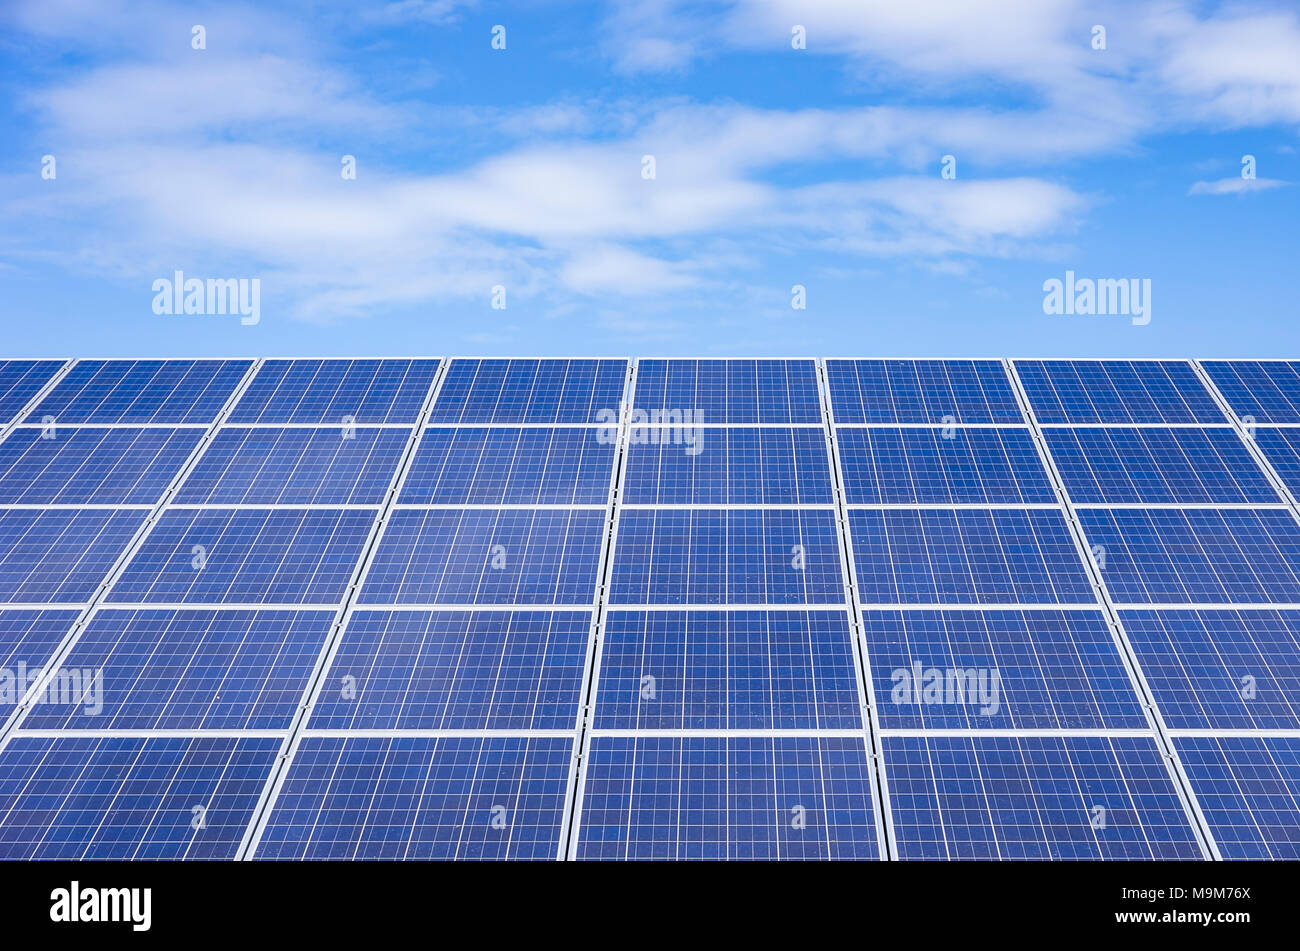 Photovoltaic cells on roofs provide alternative, renewable and solar energy. Stock Photo